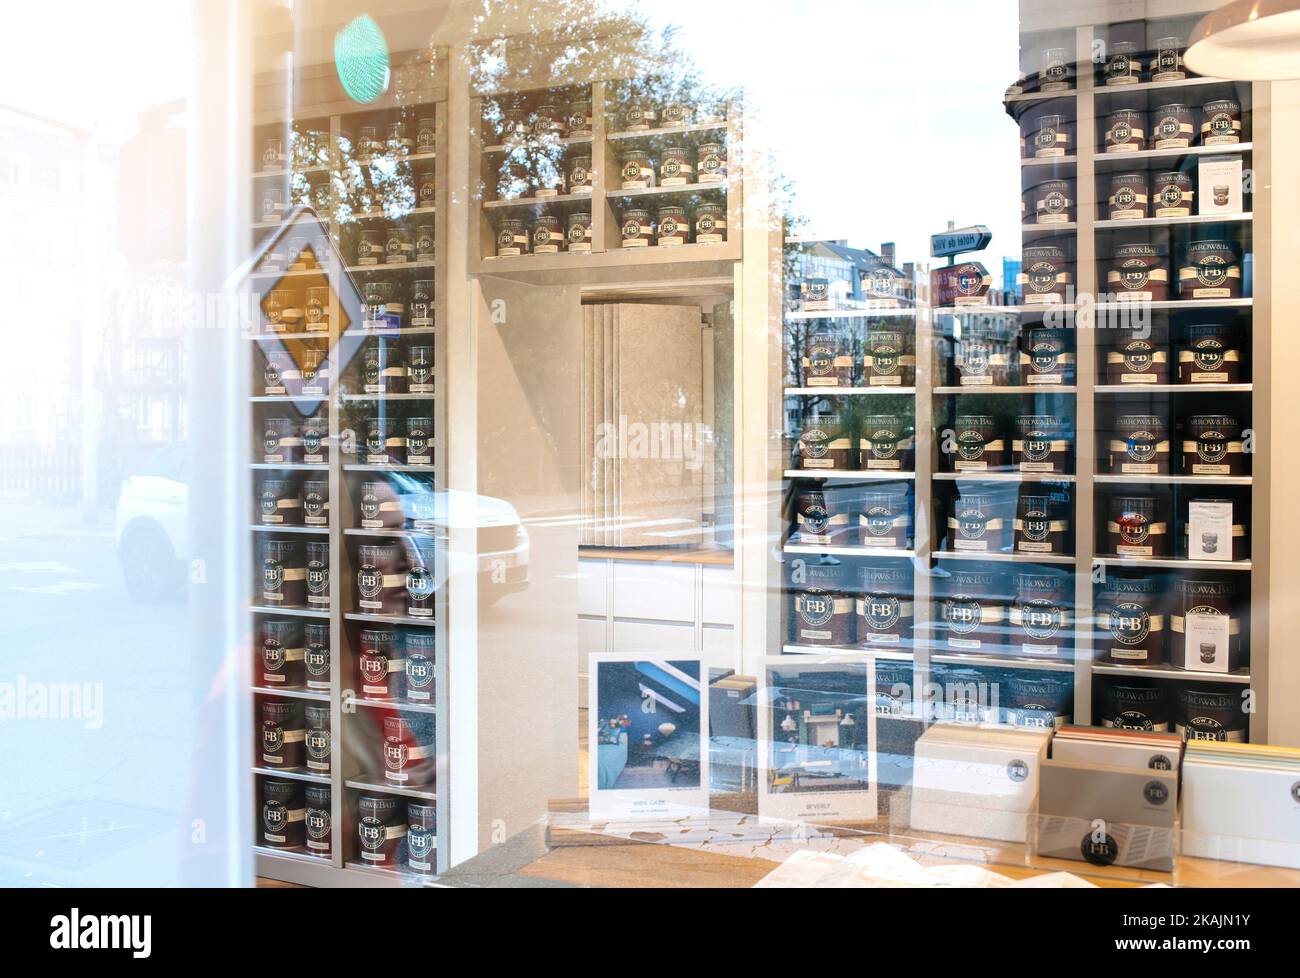 Strasbourg, France - Oct 28, 2022: Tens of Farrow and Ball luxury British paint in the branded store - British manufacturer of paints and wallpapers largely based upon historic colour palettes and archives - car reflected in showcase Stock Photo